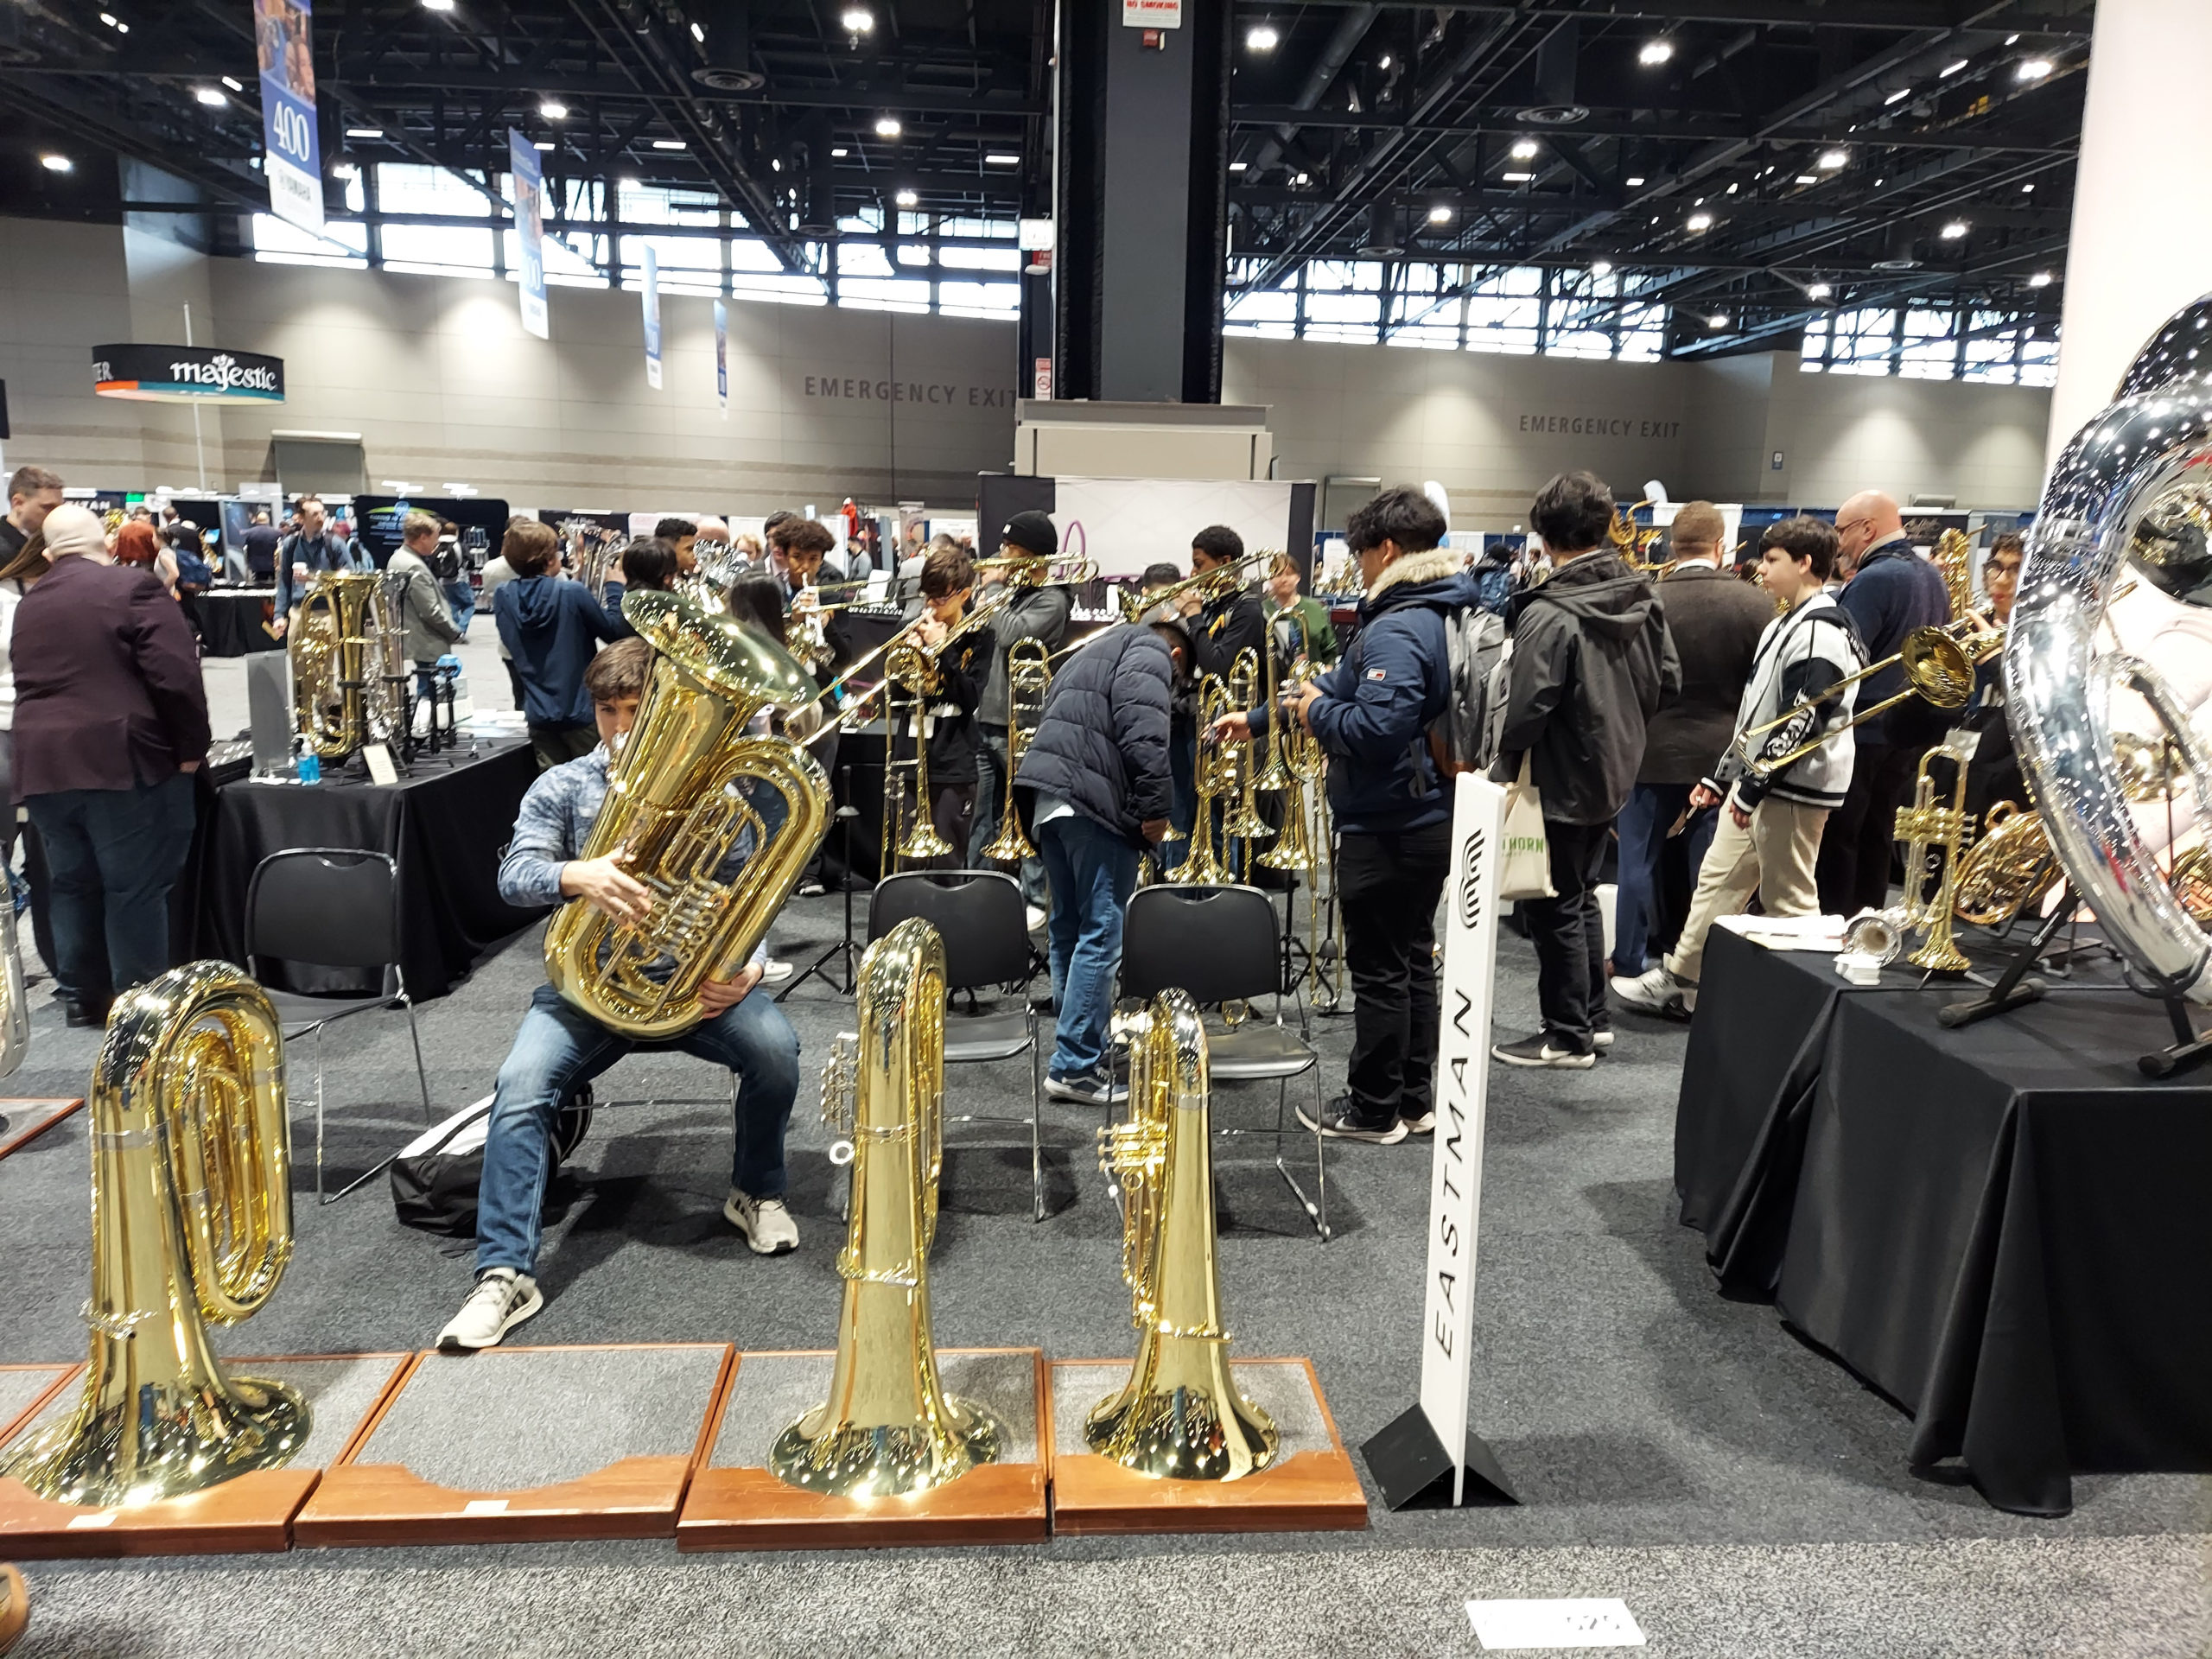 An assortment of tubas at the Exhibition Hall during the Midwest Clinic